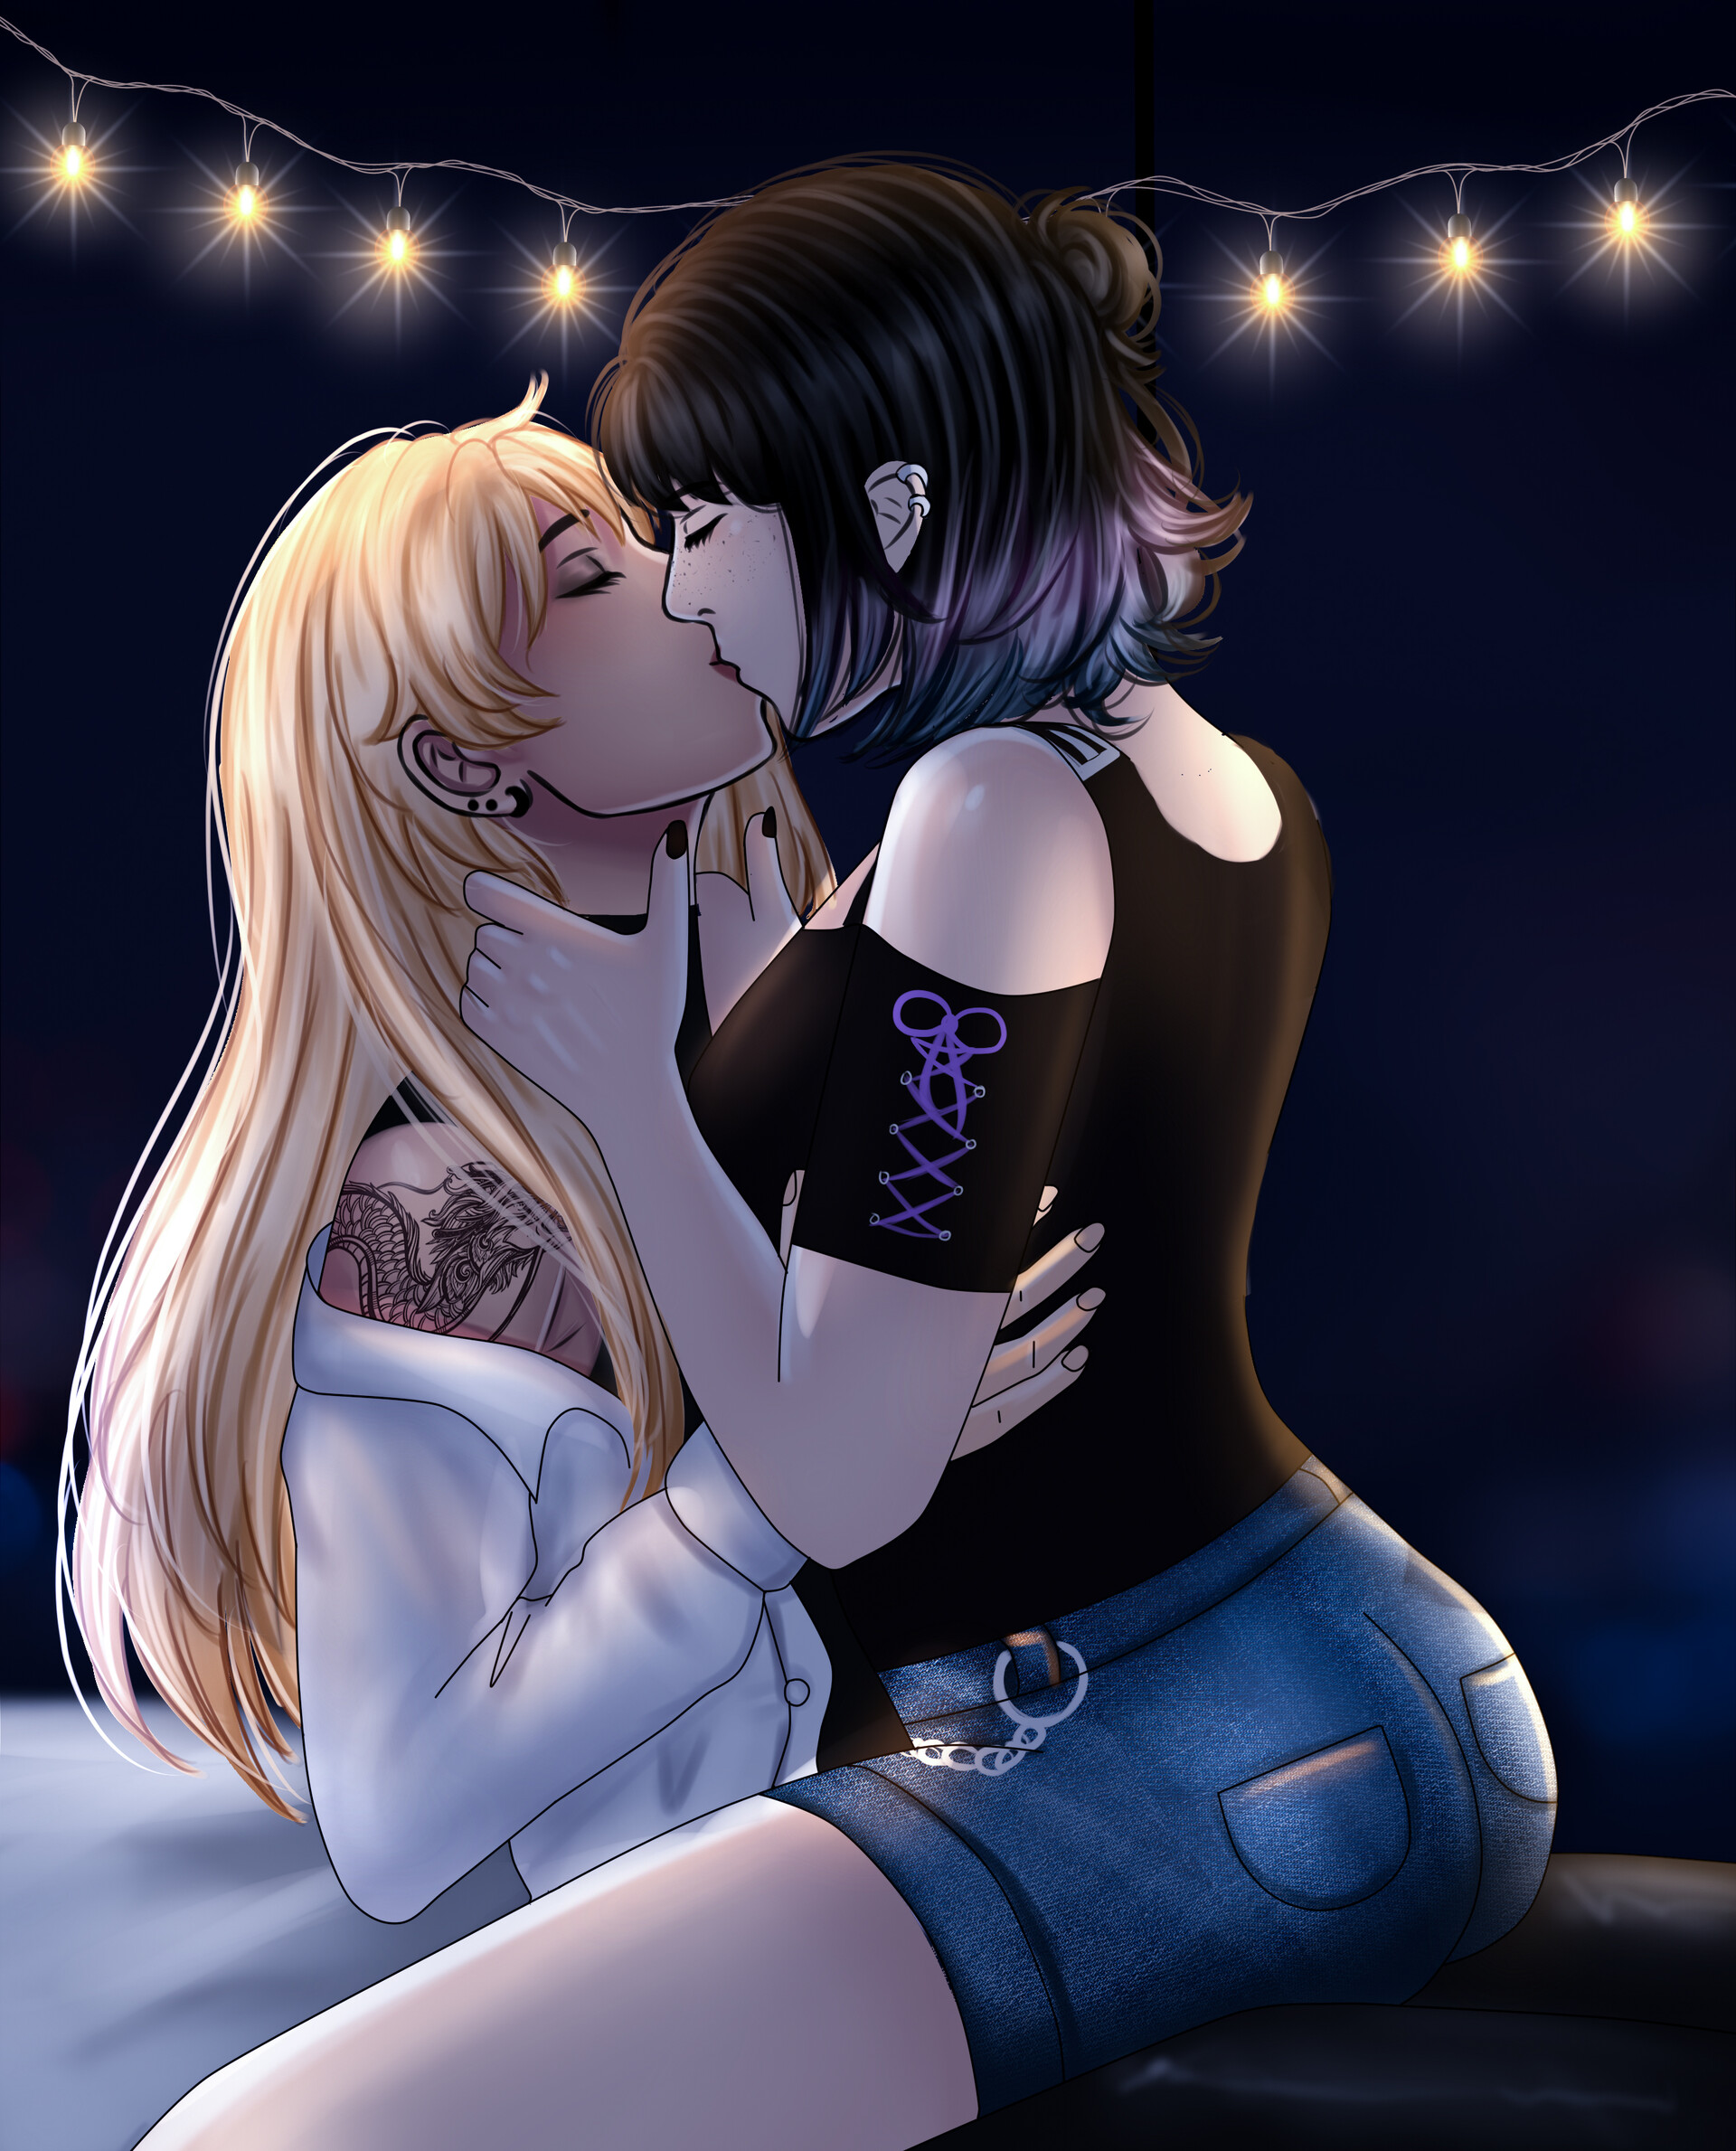 Best of Anime lesbians making out